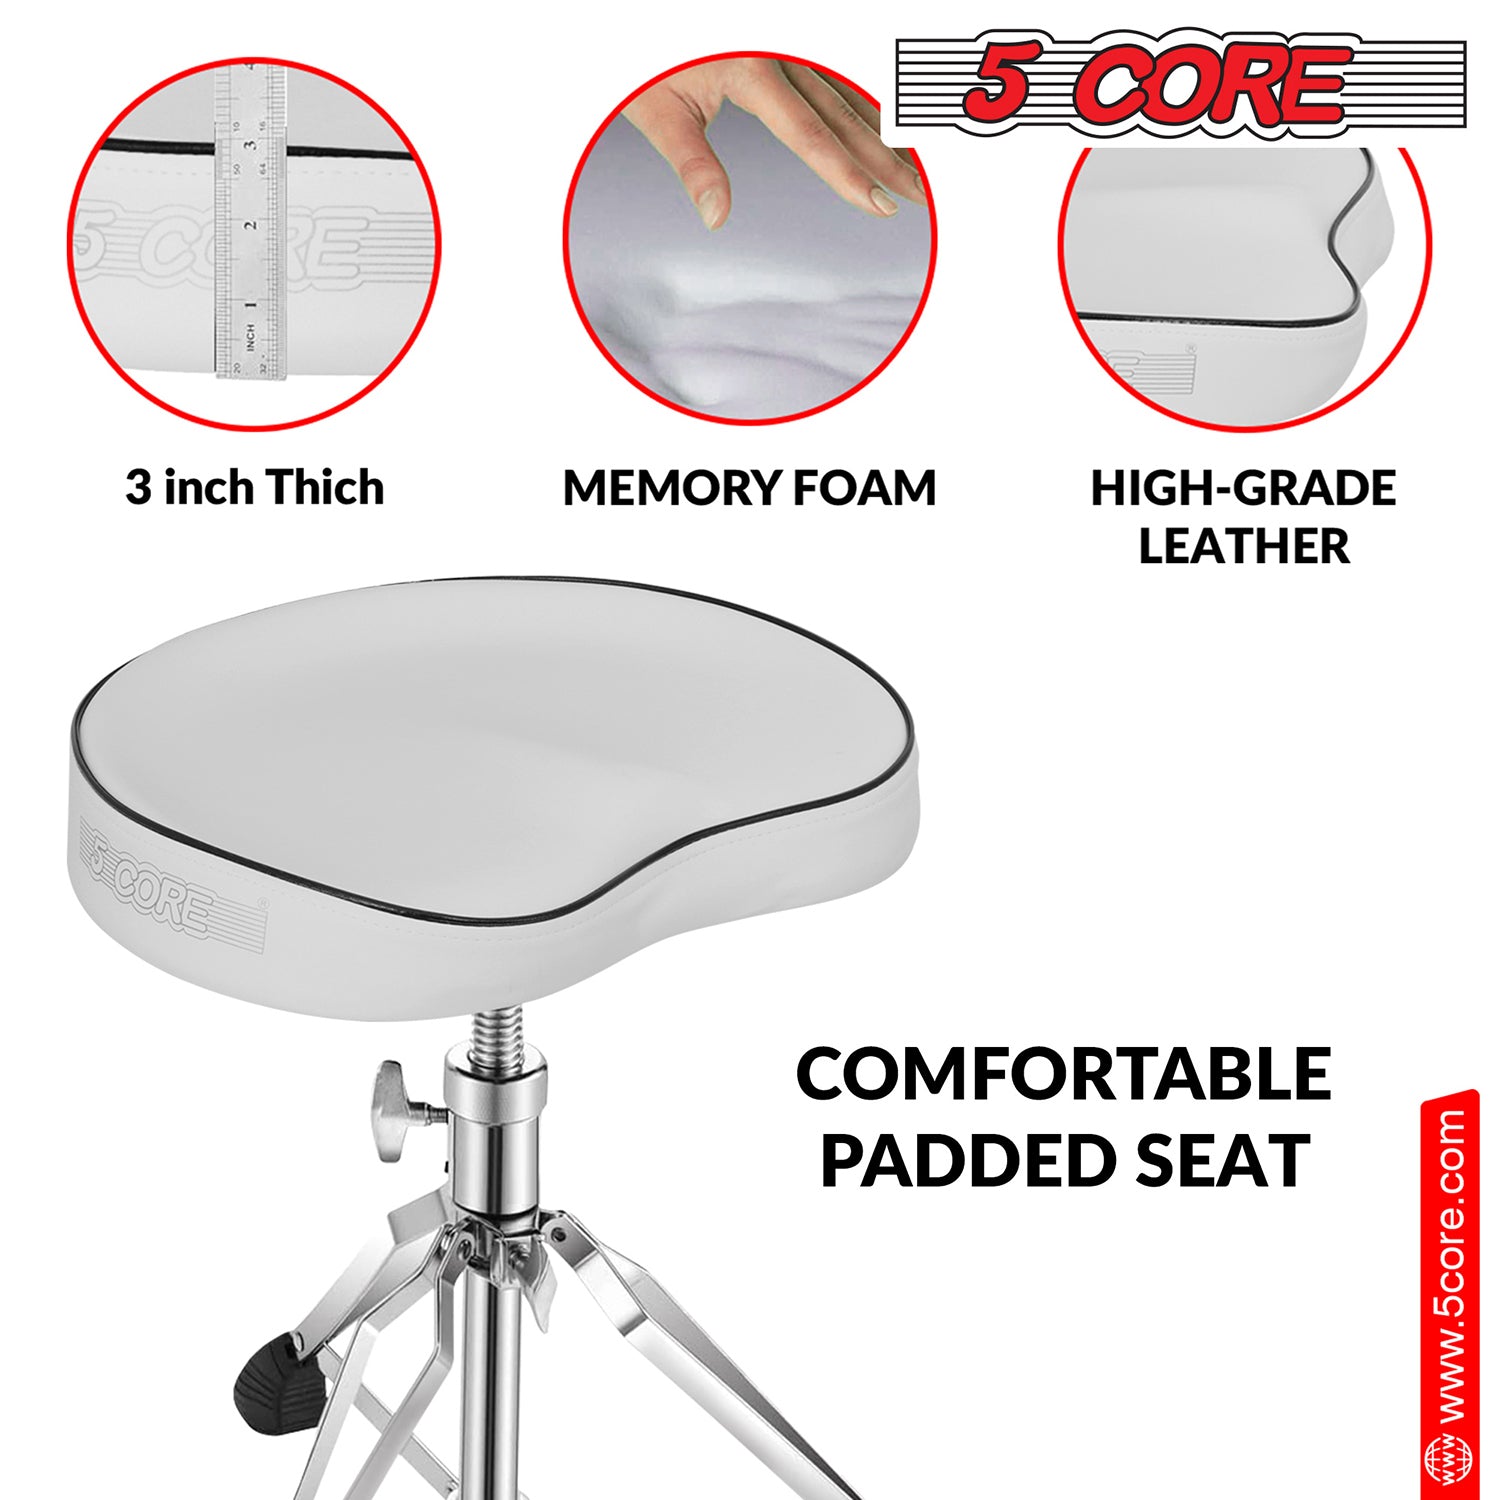 5 Core Studio Throne: Ergonomic music stool with padded seat and adjustable height for studio use.